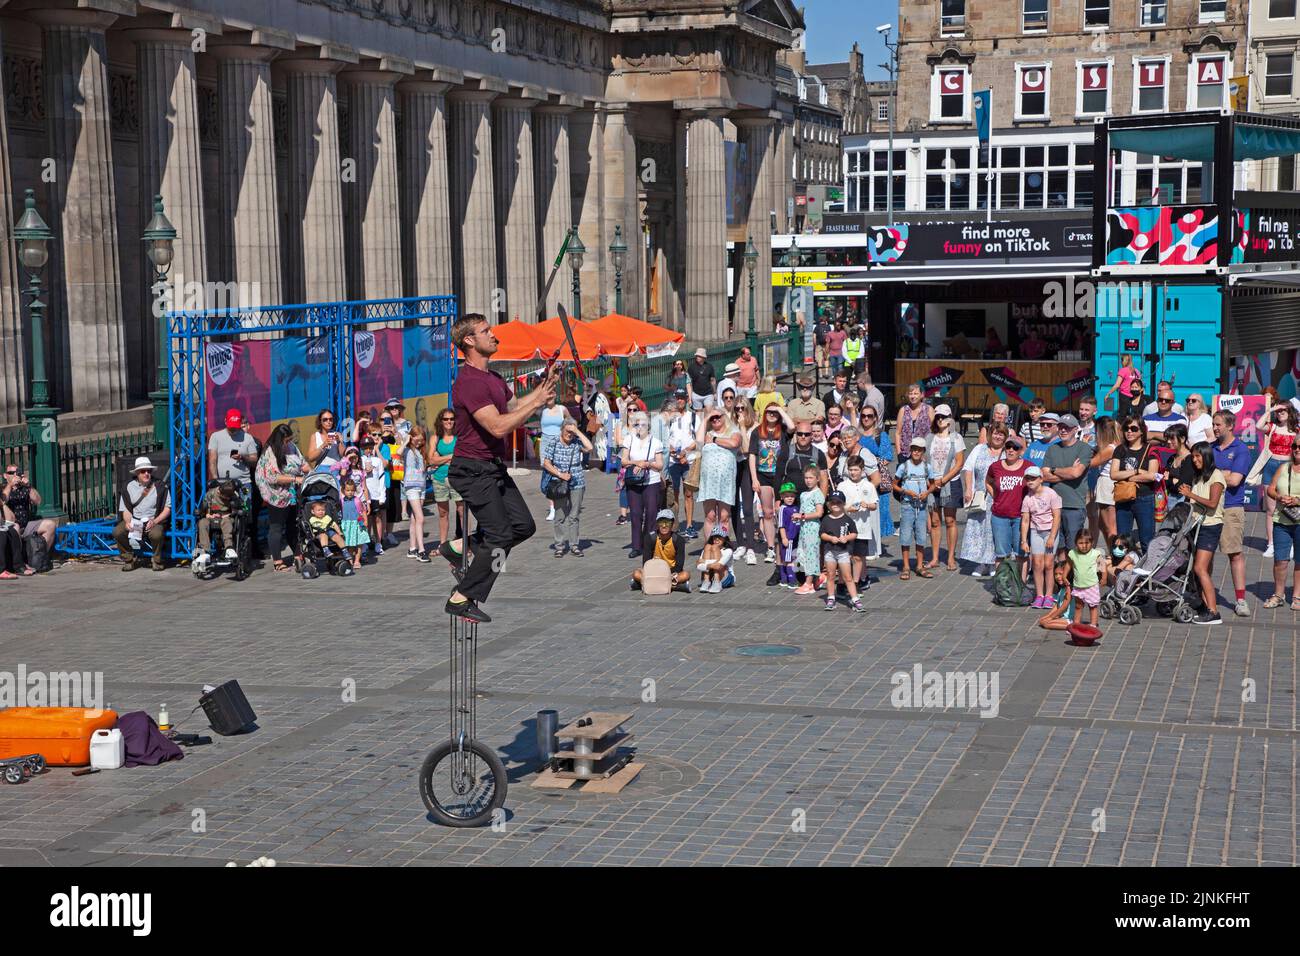 Edinburgh city centre, Scotland, UK. 12th August 2022. Edinburgh busy for the 8th day of Edinburgh Festival Fringe at various venues in the capital city for the end of the first full week. Temperature 21 degrees centigrade for those out and about. Pictured: A male street performer entertains a decent crowd at The Mound pitch, just before noon. Credit: Arch White/alamy live news. Stock Photo